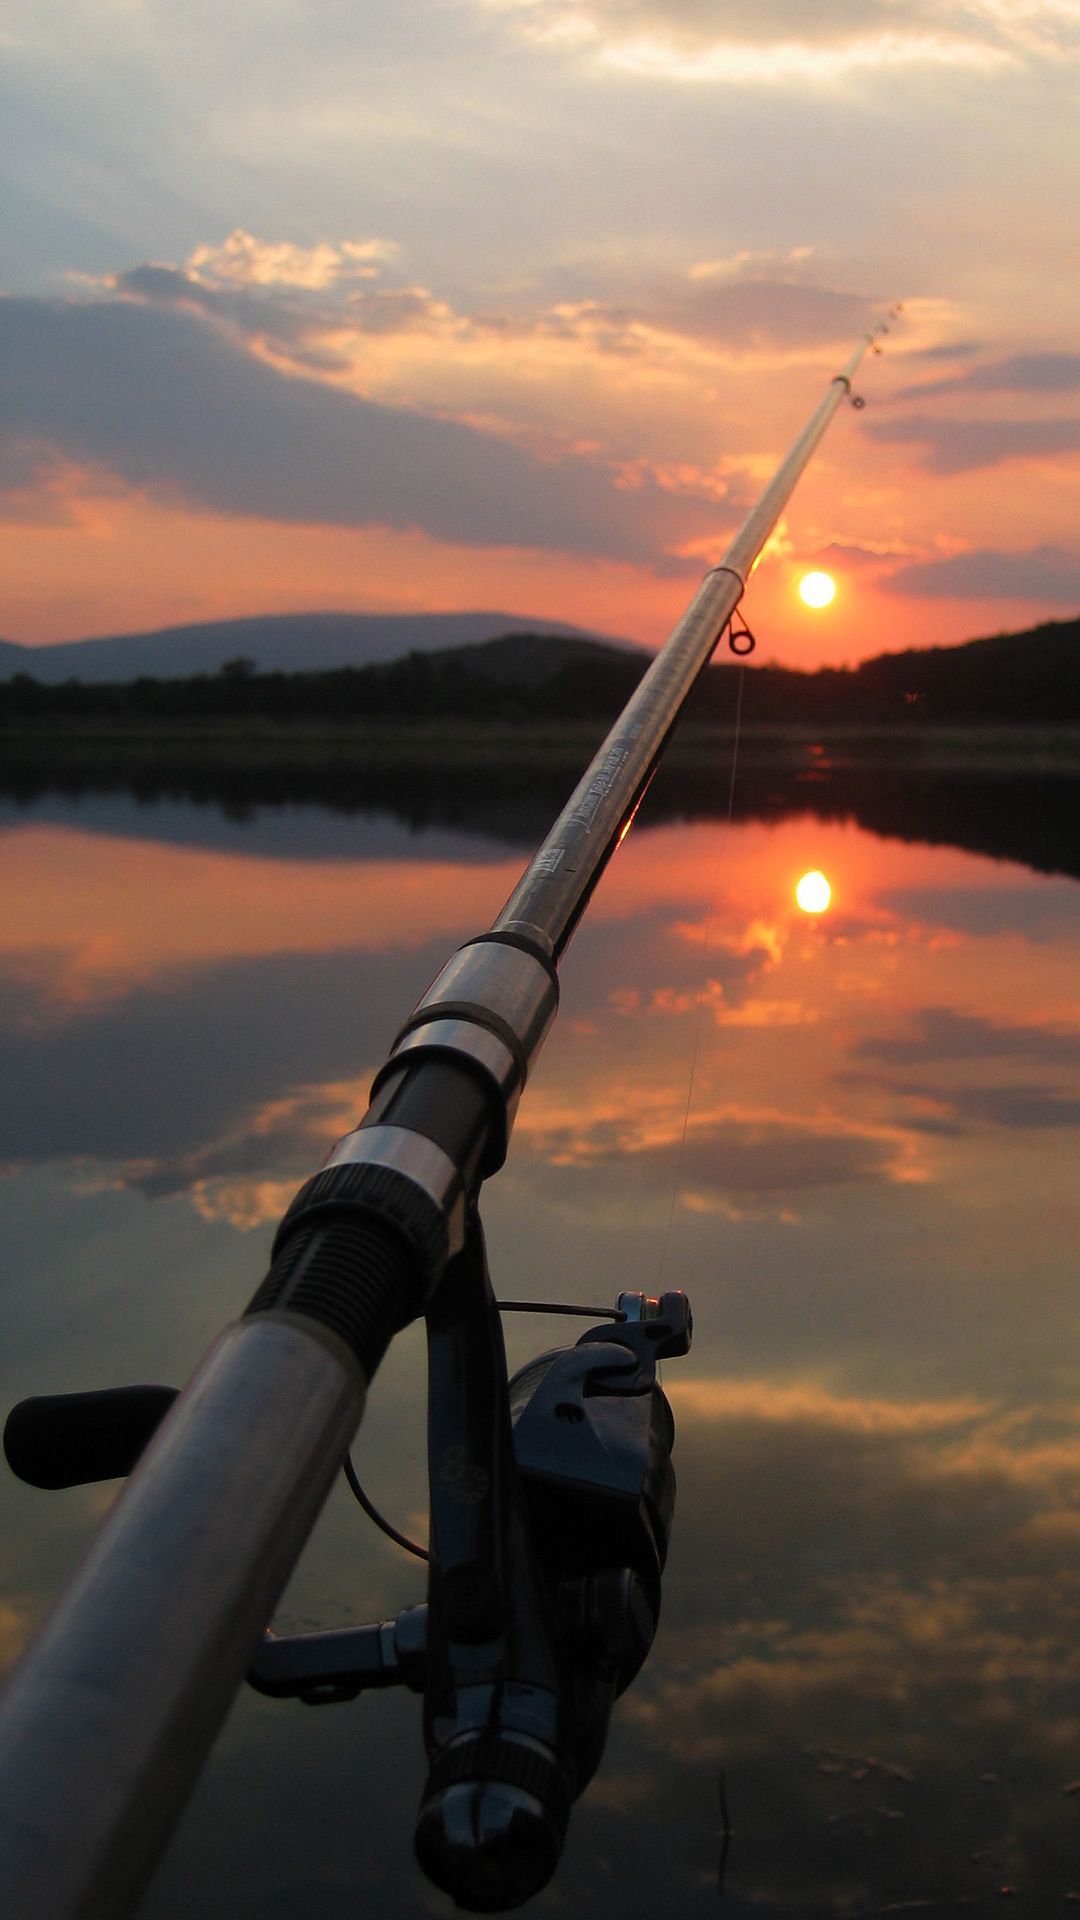 Fishing Rod iPhone 6S Plus Wallpaper​-Quality Image and Transparent PNG Free C. Fishing photo, Fishing picture, Fishing techniques